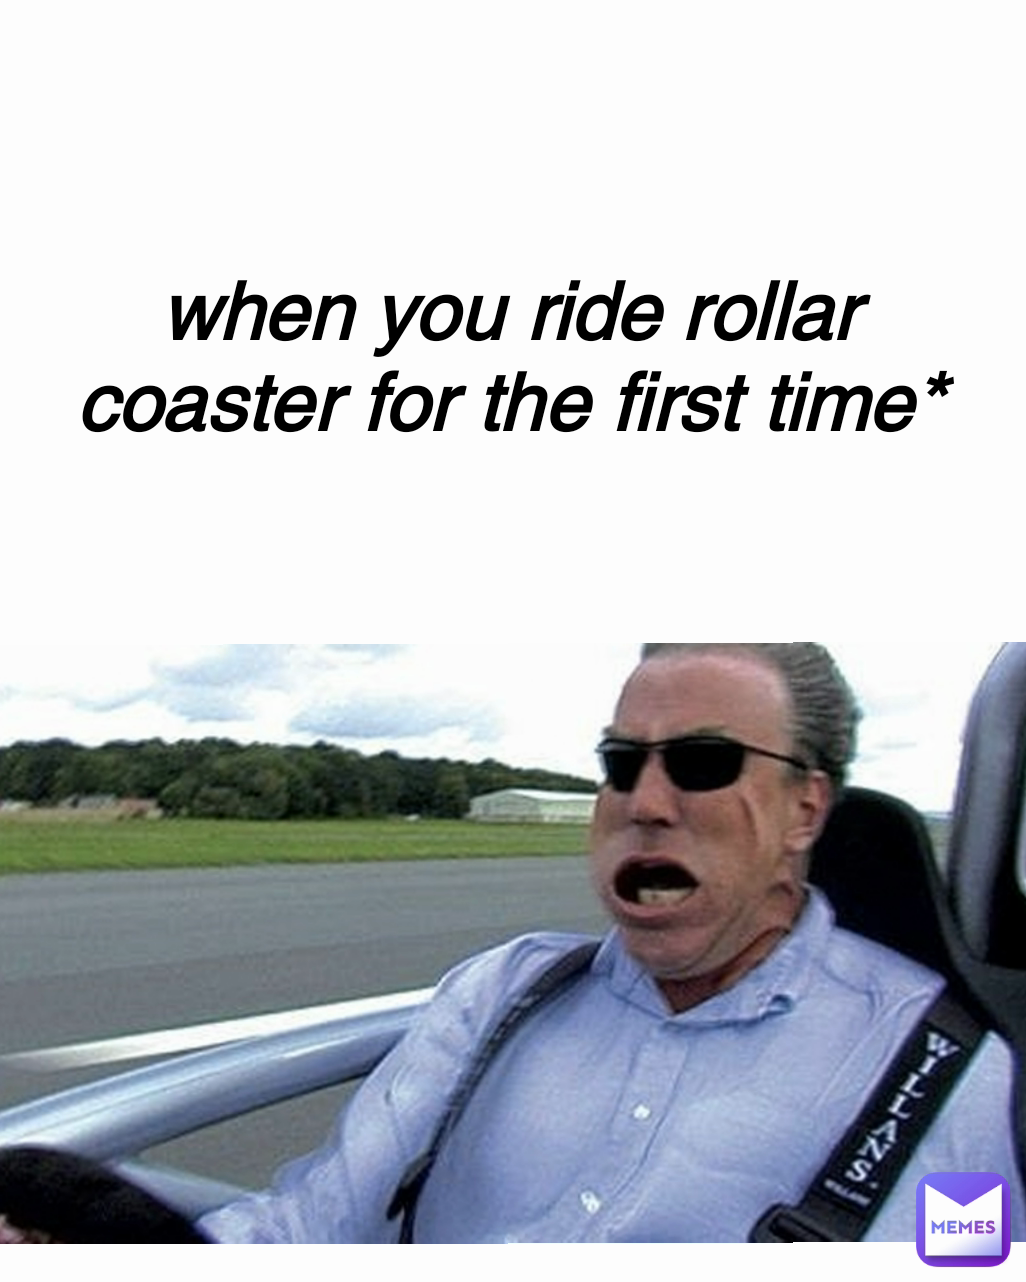 when you ride rollar coaster for the first time*